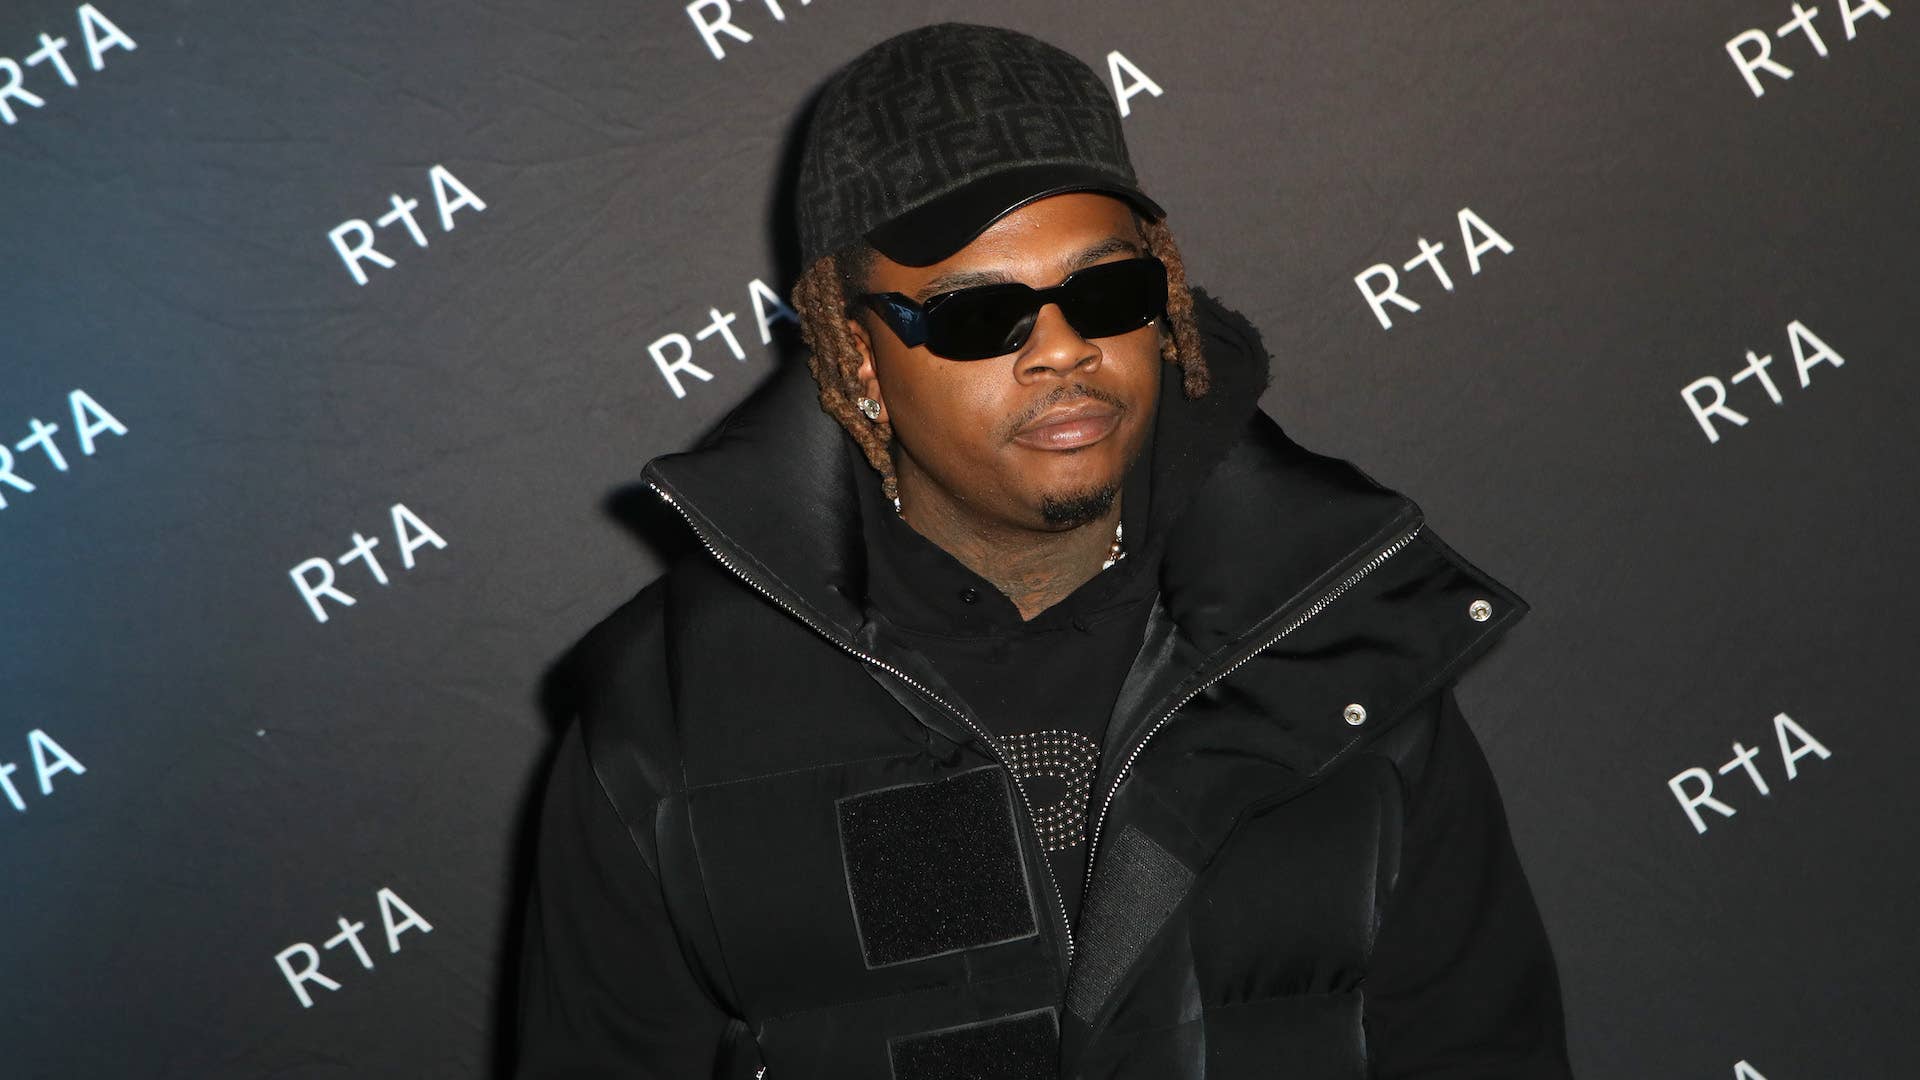 Gunna photographed at Superbowl event